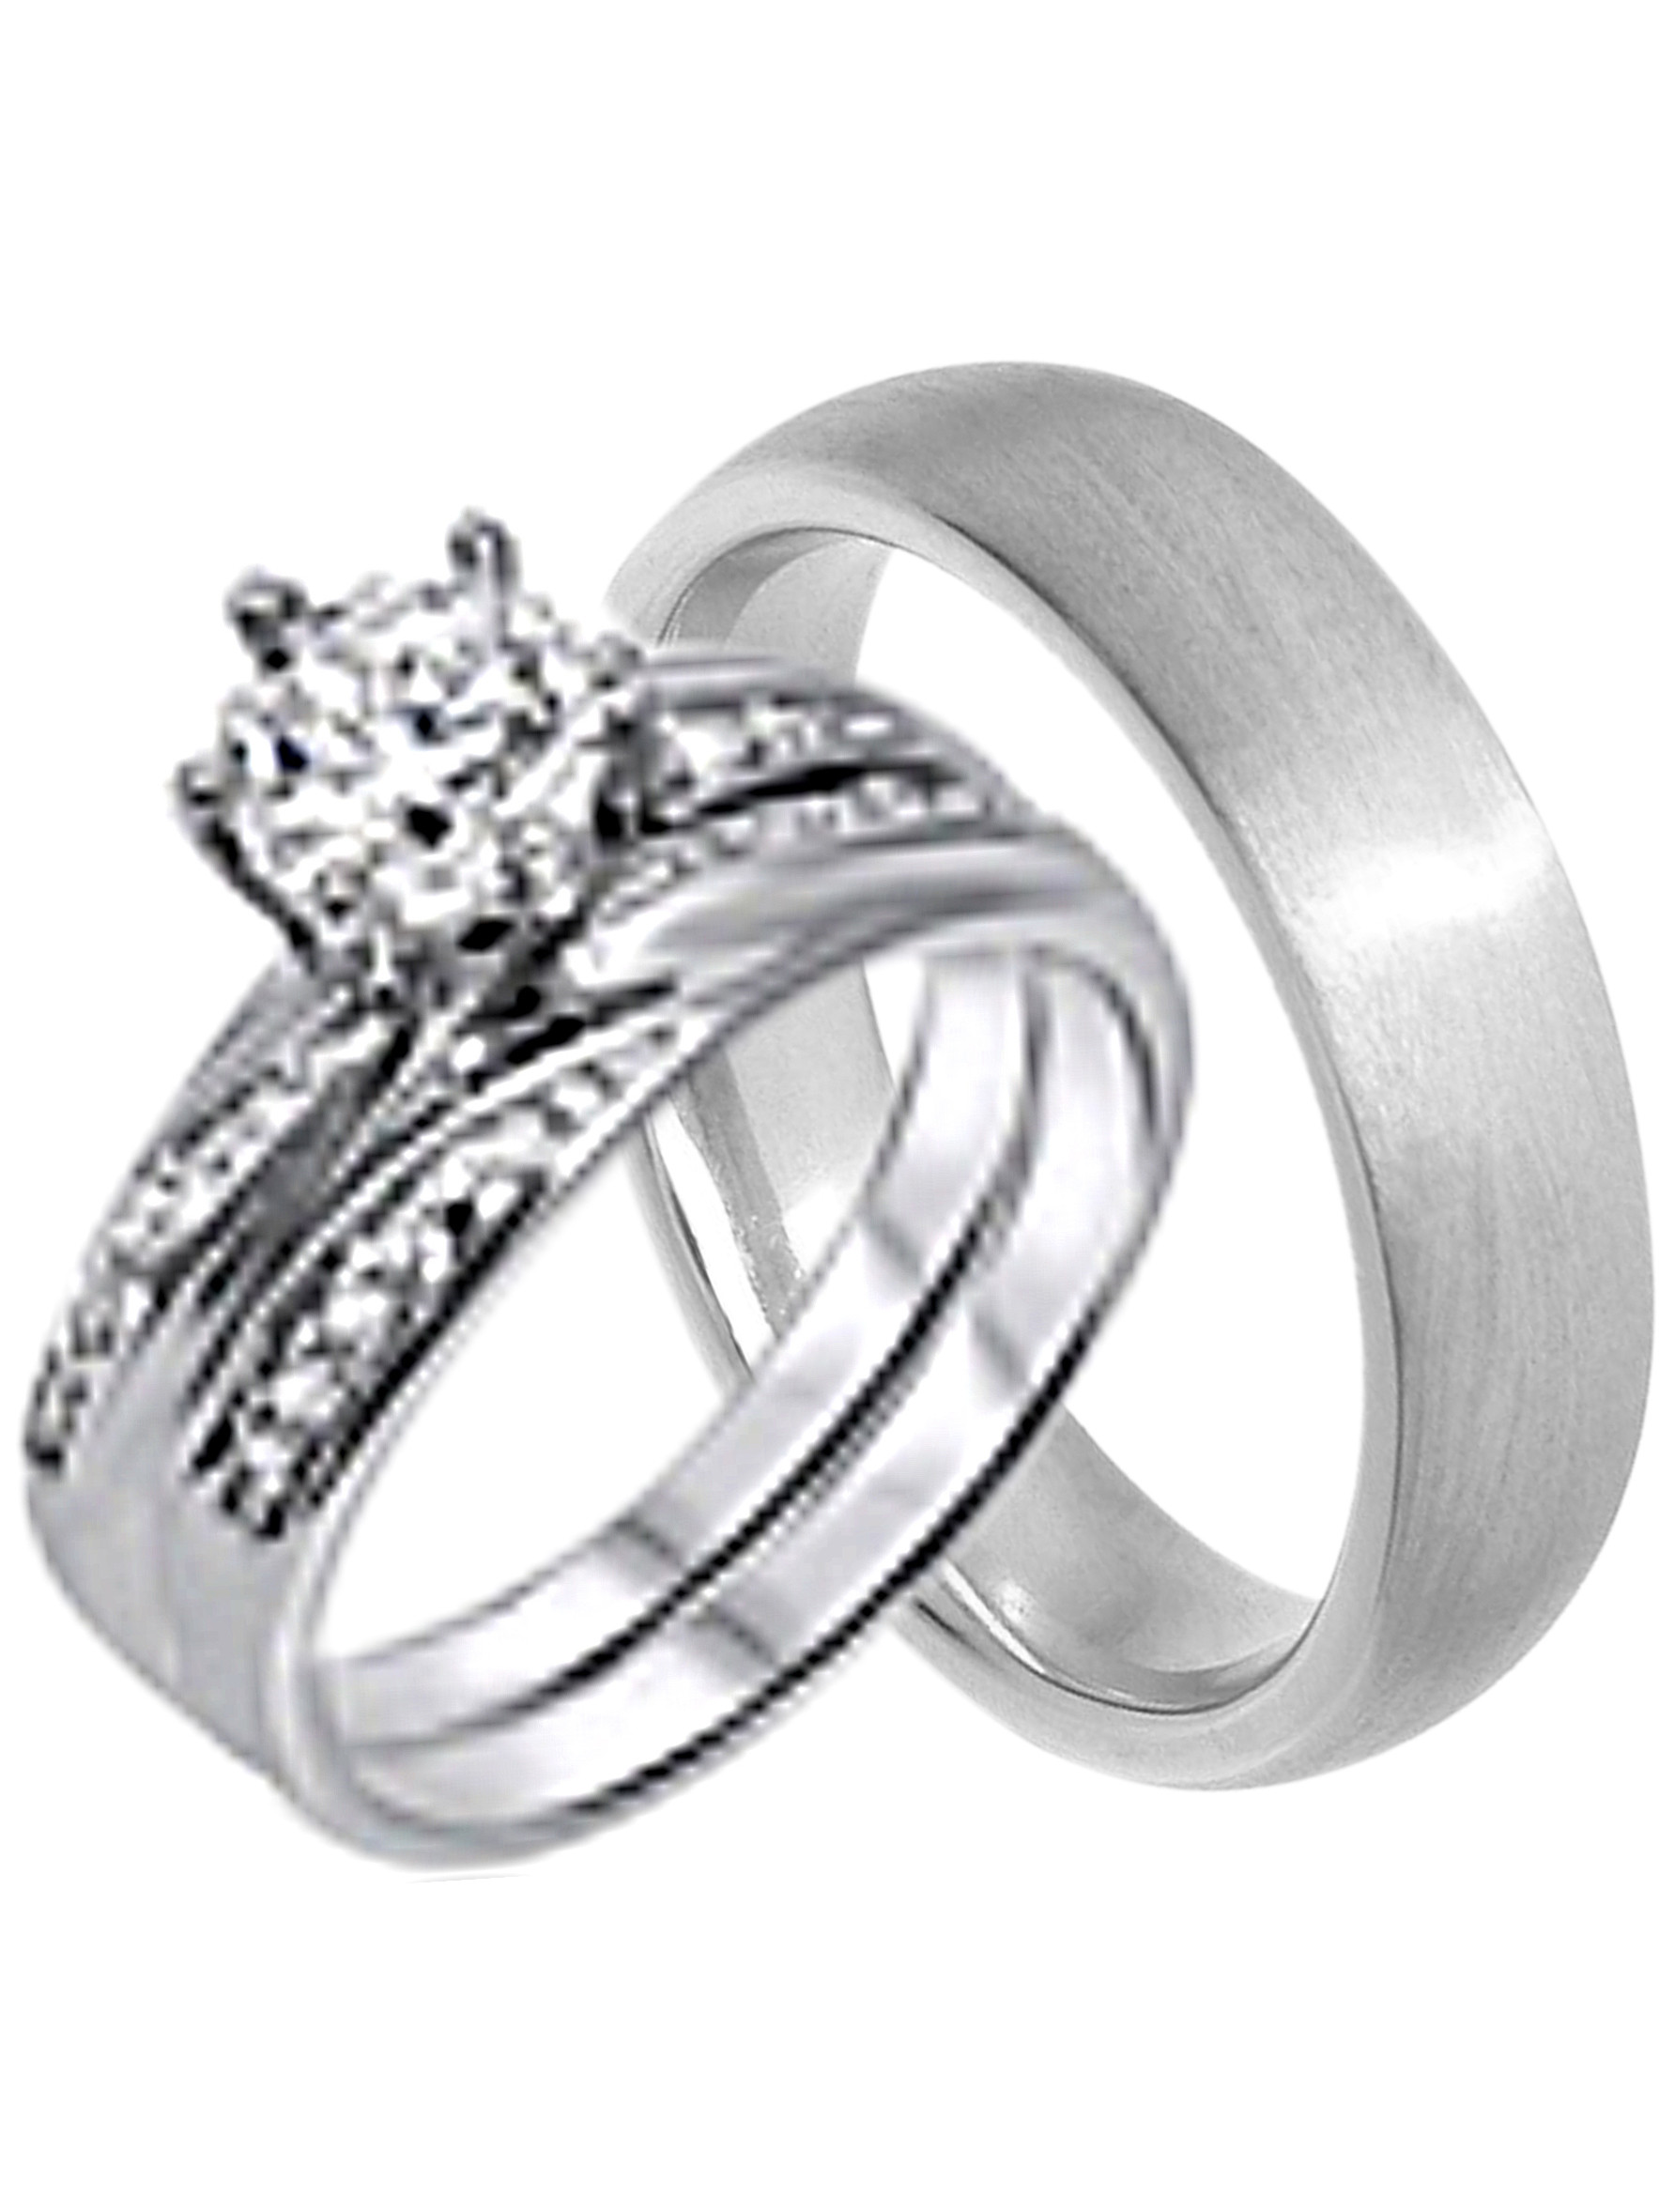 Cheap Wedding Bands For Him And Her
 His and Hers Wedding Ring Set Cheap Wedding Bands for Him